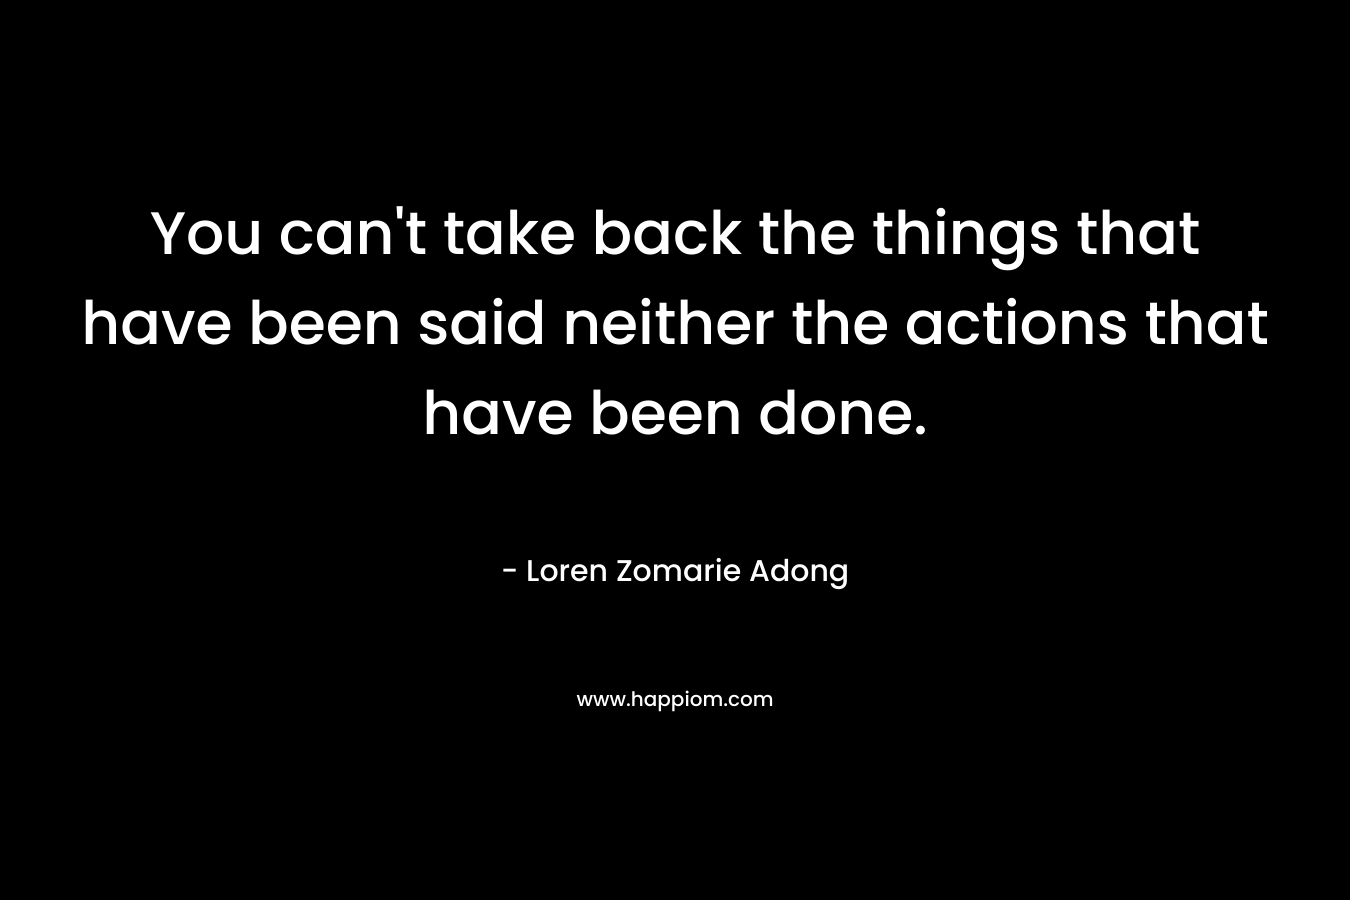 You can’t take back the things that have been said neither the actions that have been done. – Loren Zomarie Adong